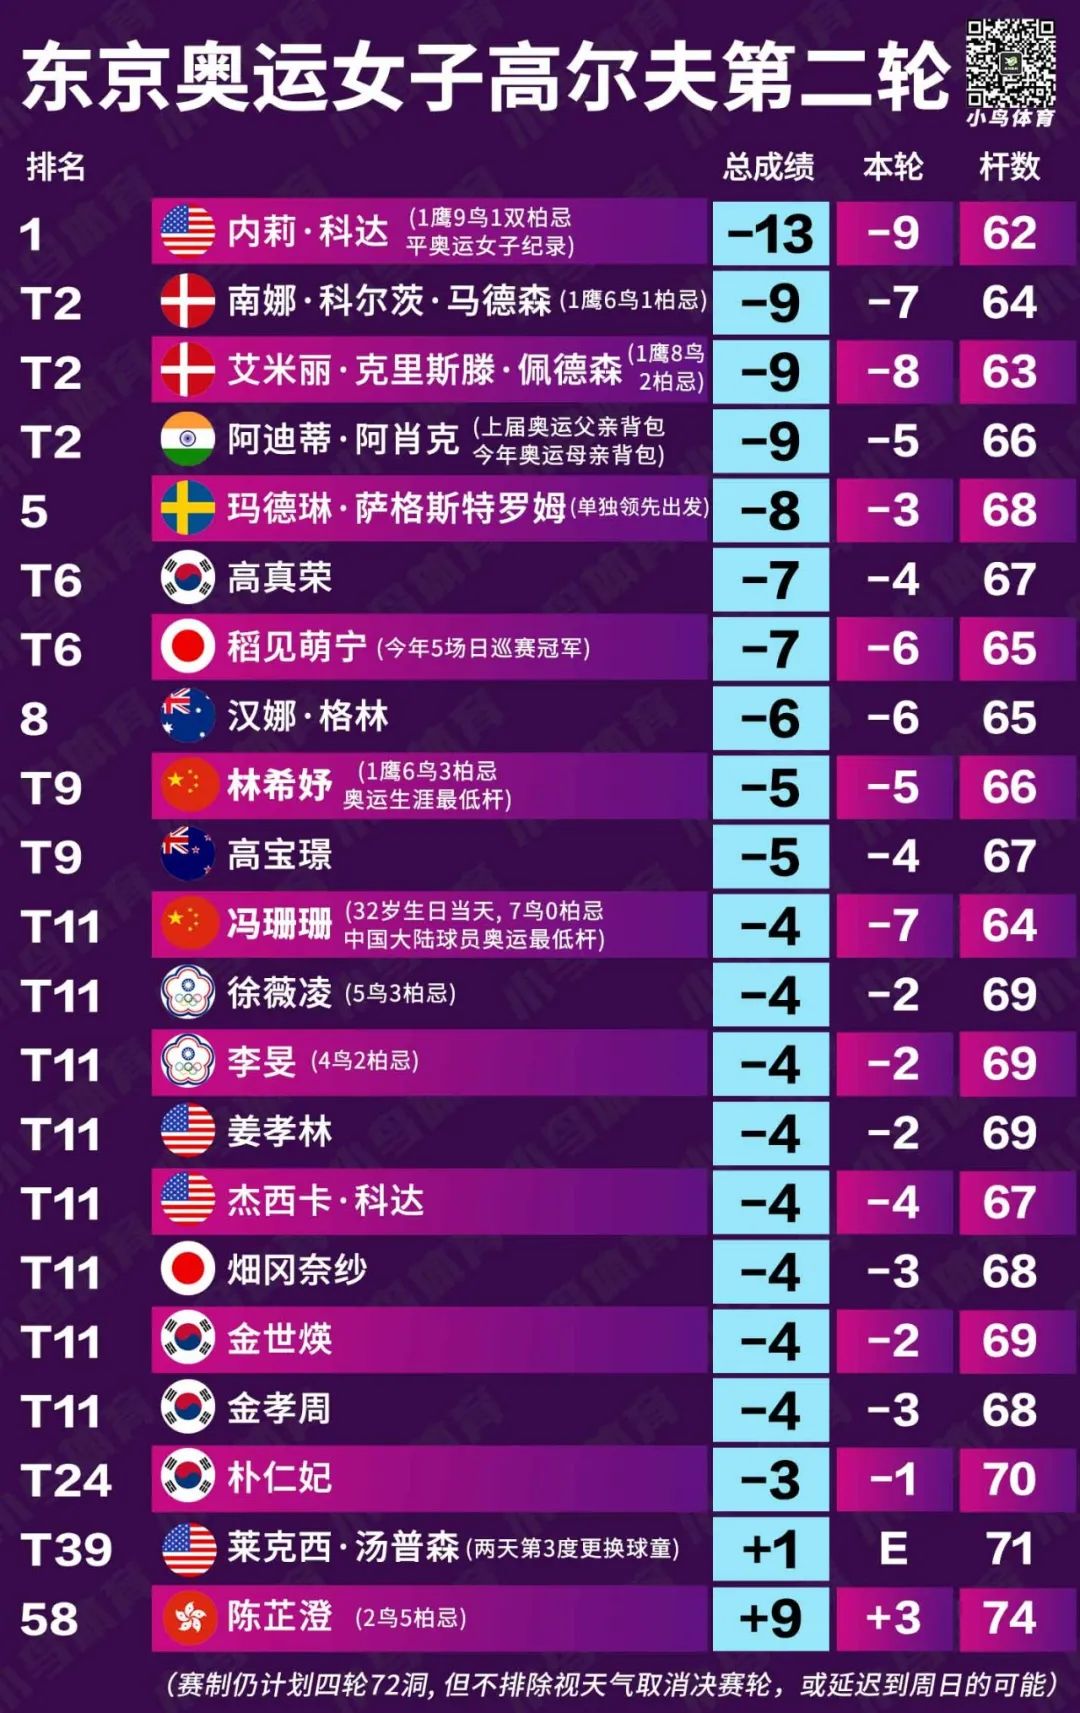 China Golden Flower is courageously catching up! The second round of battle reports丨Olympics are in progress